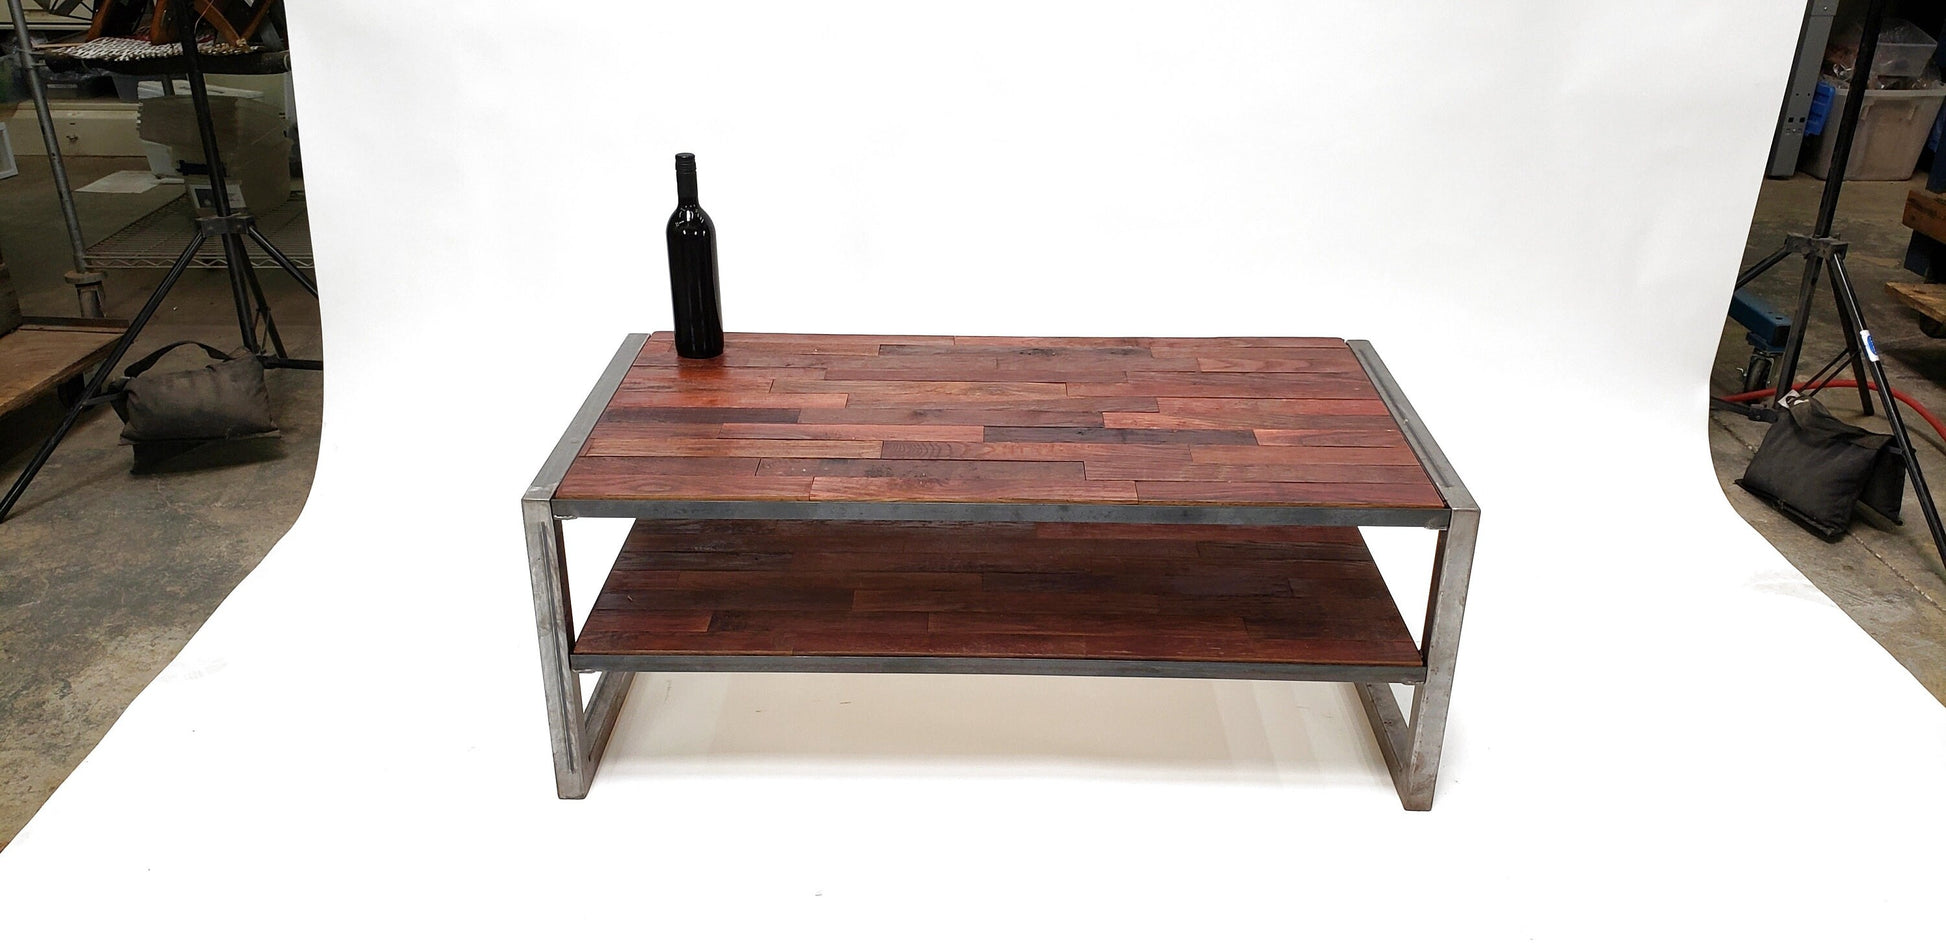 California Wine Barrel and Hand Welded Recycled Steel Coffee Table - Kafe - Cask Oak Side Table. 100% Recycled!